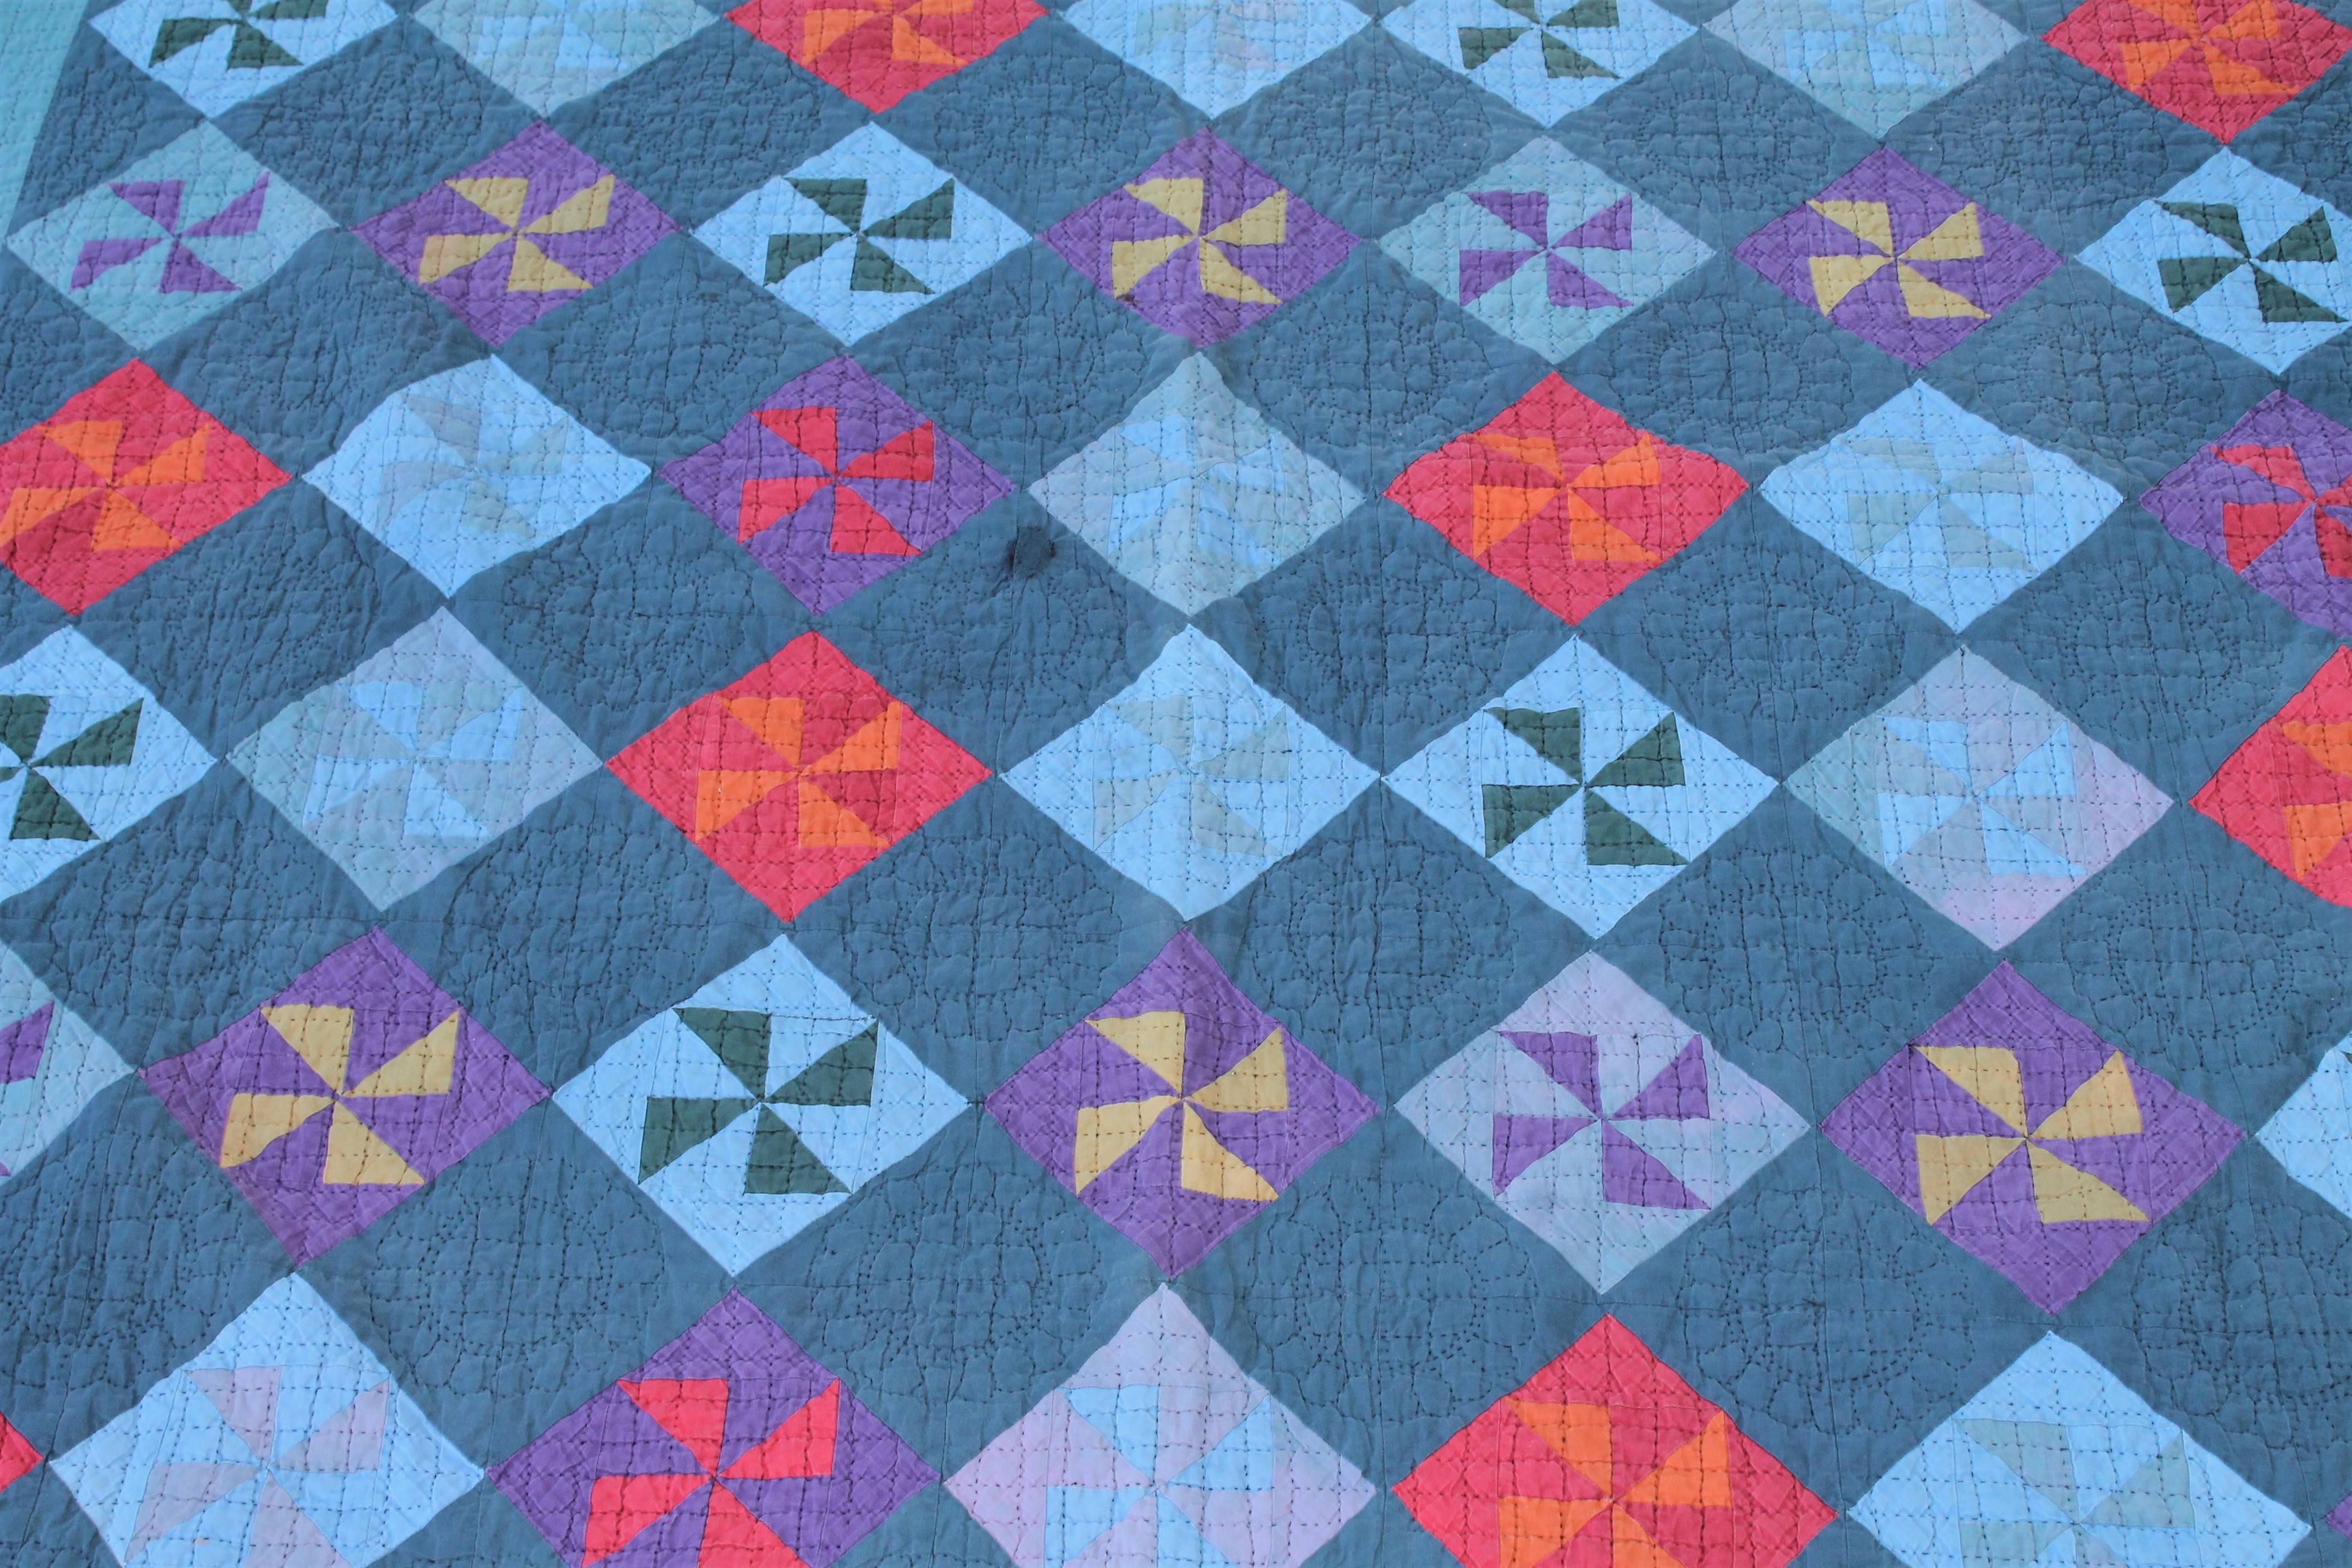 This mid-western Amish pin wheel quilt is in good condition with one minor circular repair. The piece work and quilting is in good condition. The quilt has overall muted colors. It has a triangular border.